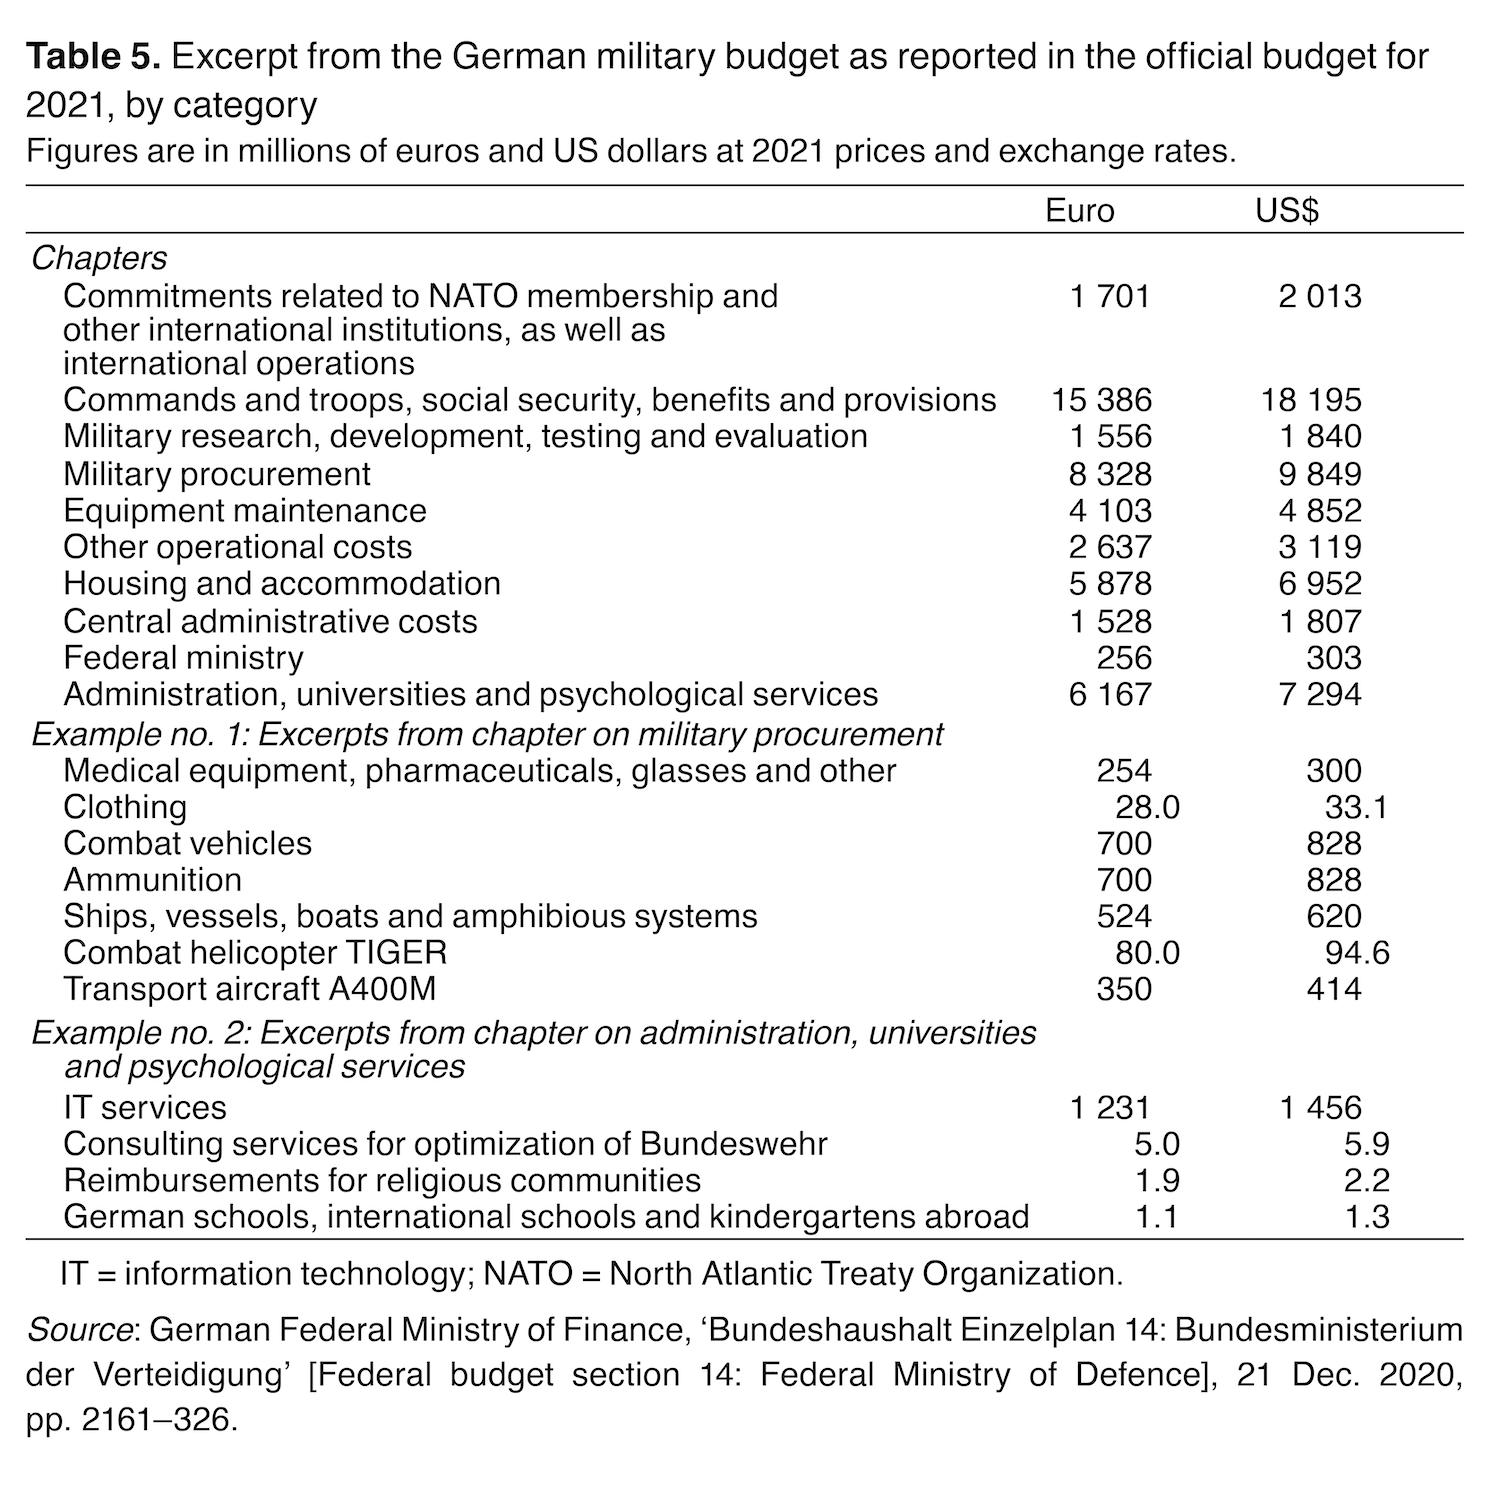 Table 5. Excerpt from the German military budget as reported in the official budget for 2021, by category